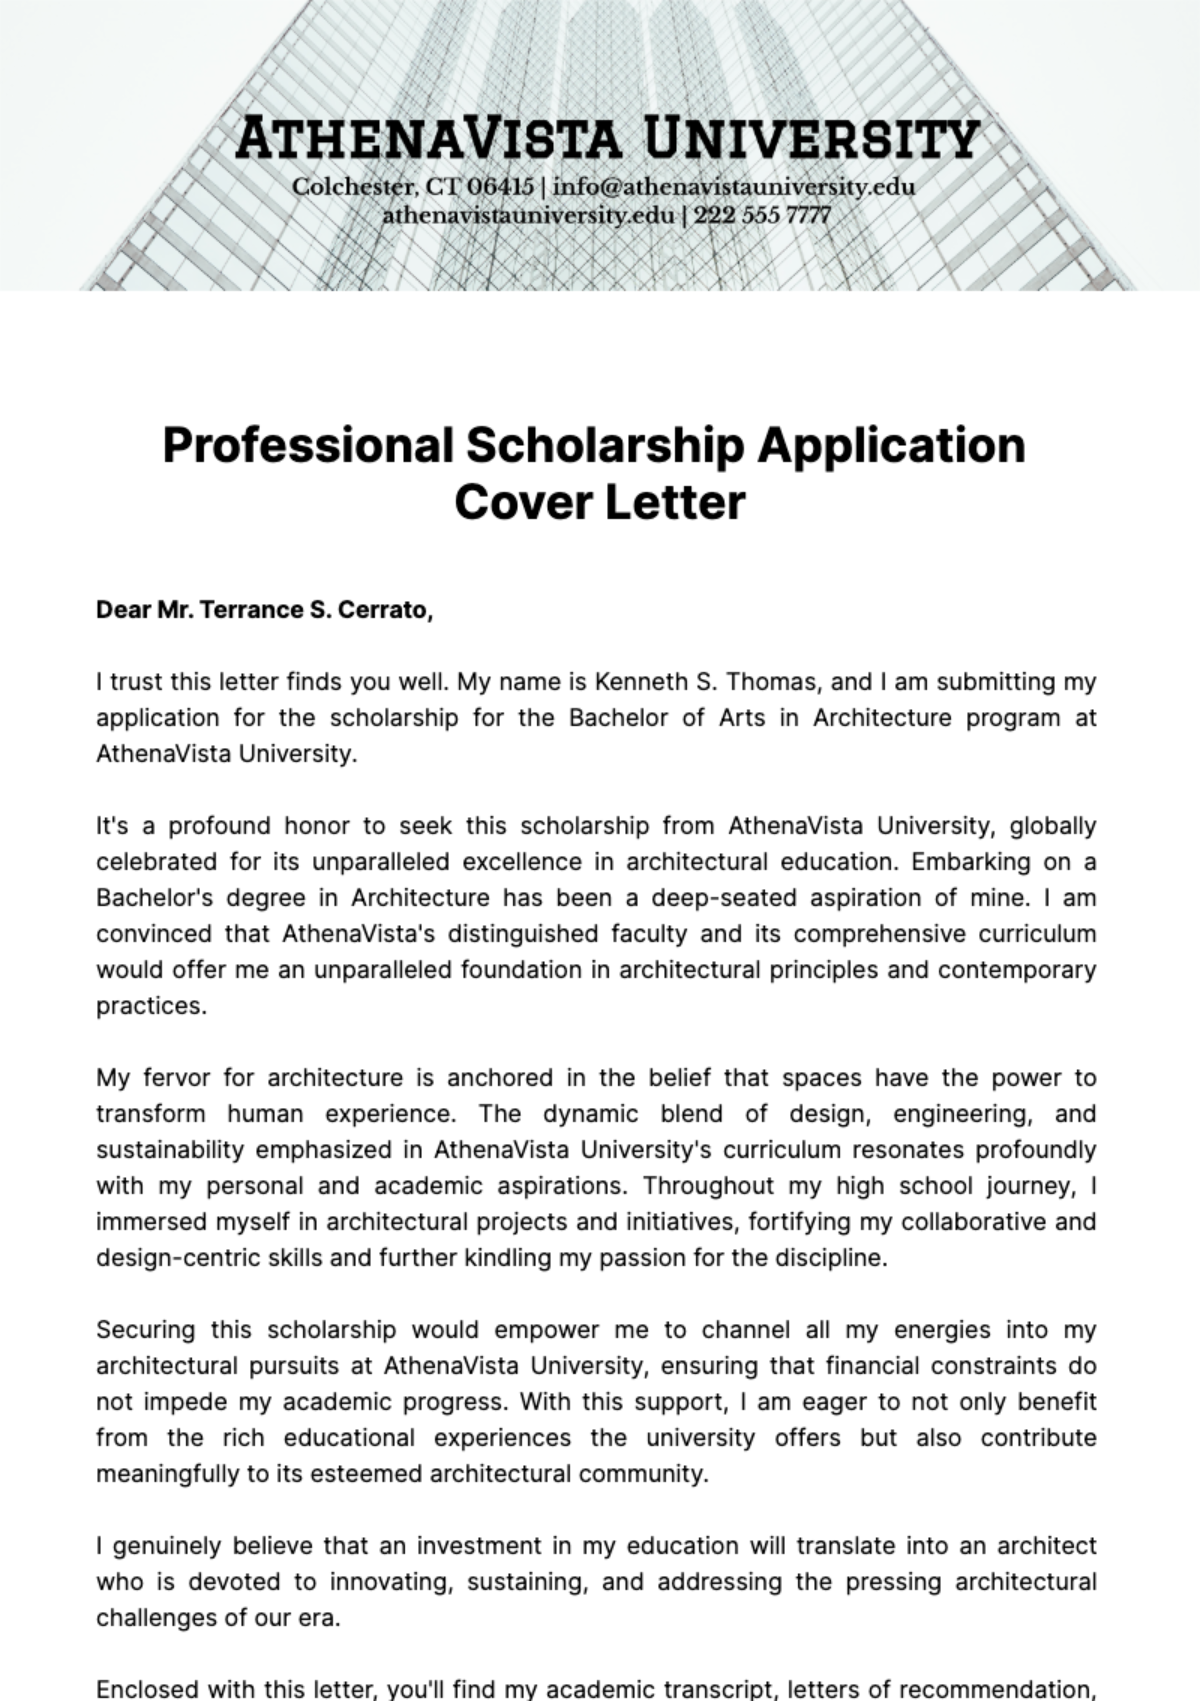 Professional Scholarship Application Cover Letter Template